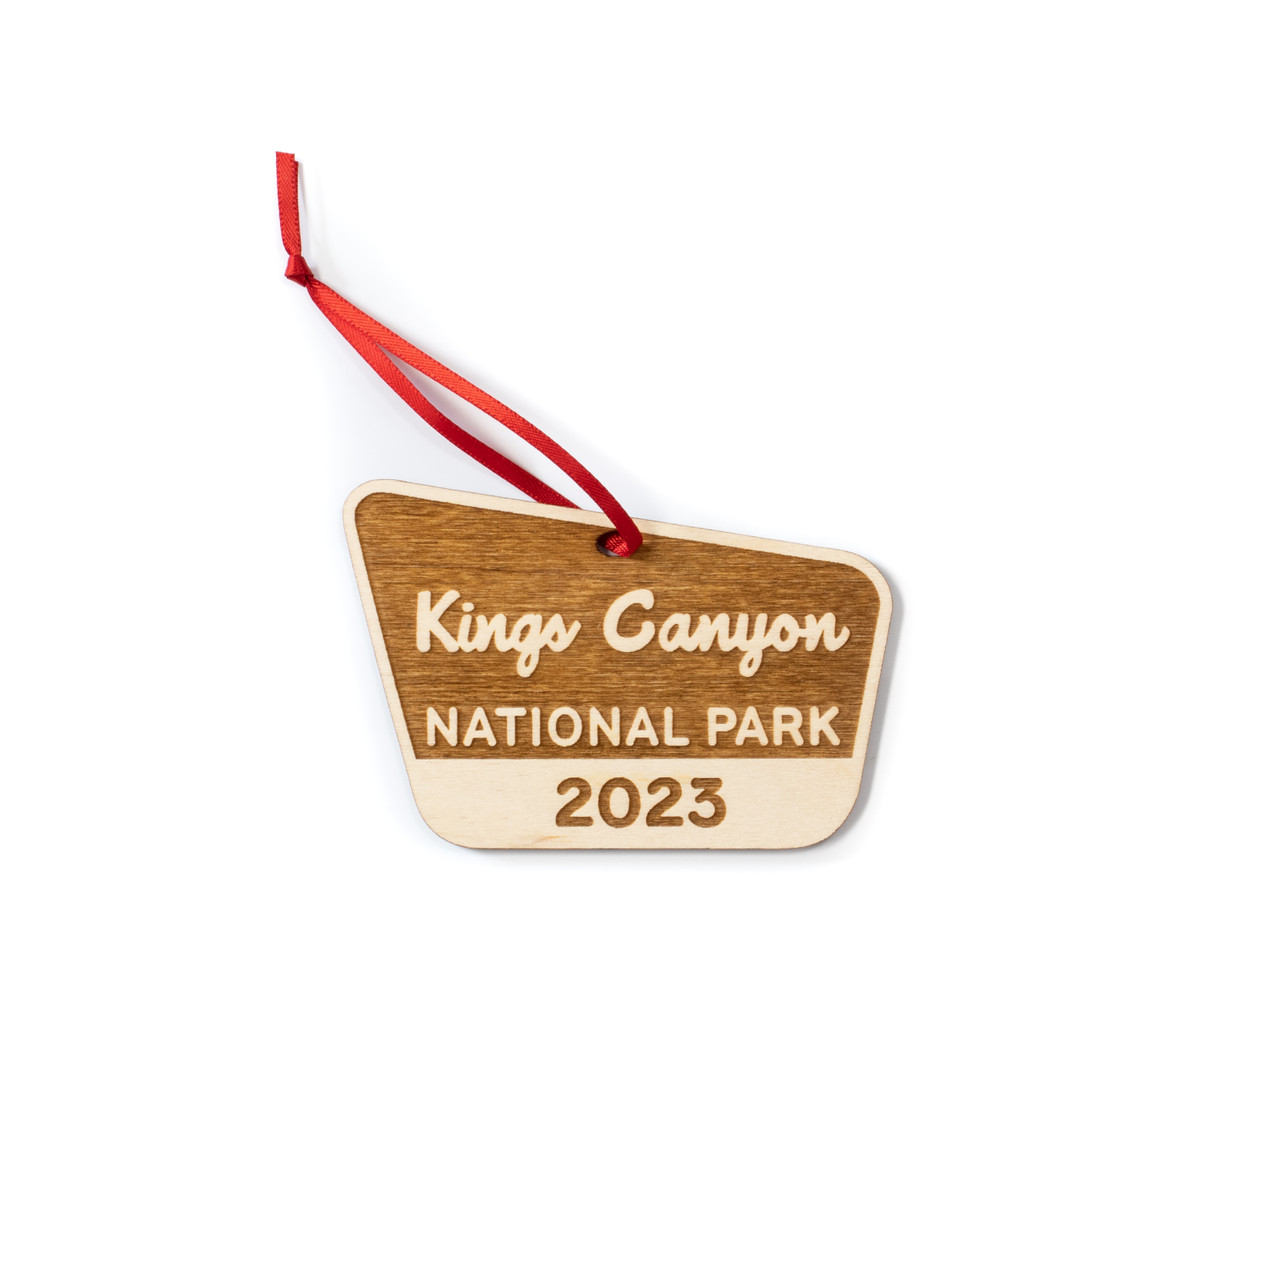 A charming engraved wooden ornament of Kings Canyon National Park: A perfect souvenir to remember the stunning landscapes and natural beauty of the park.